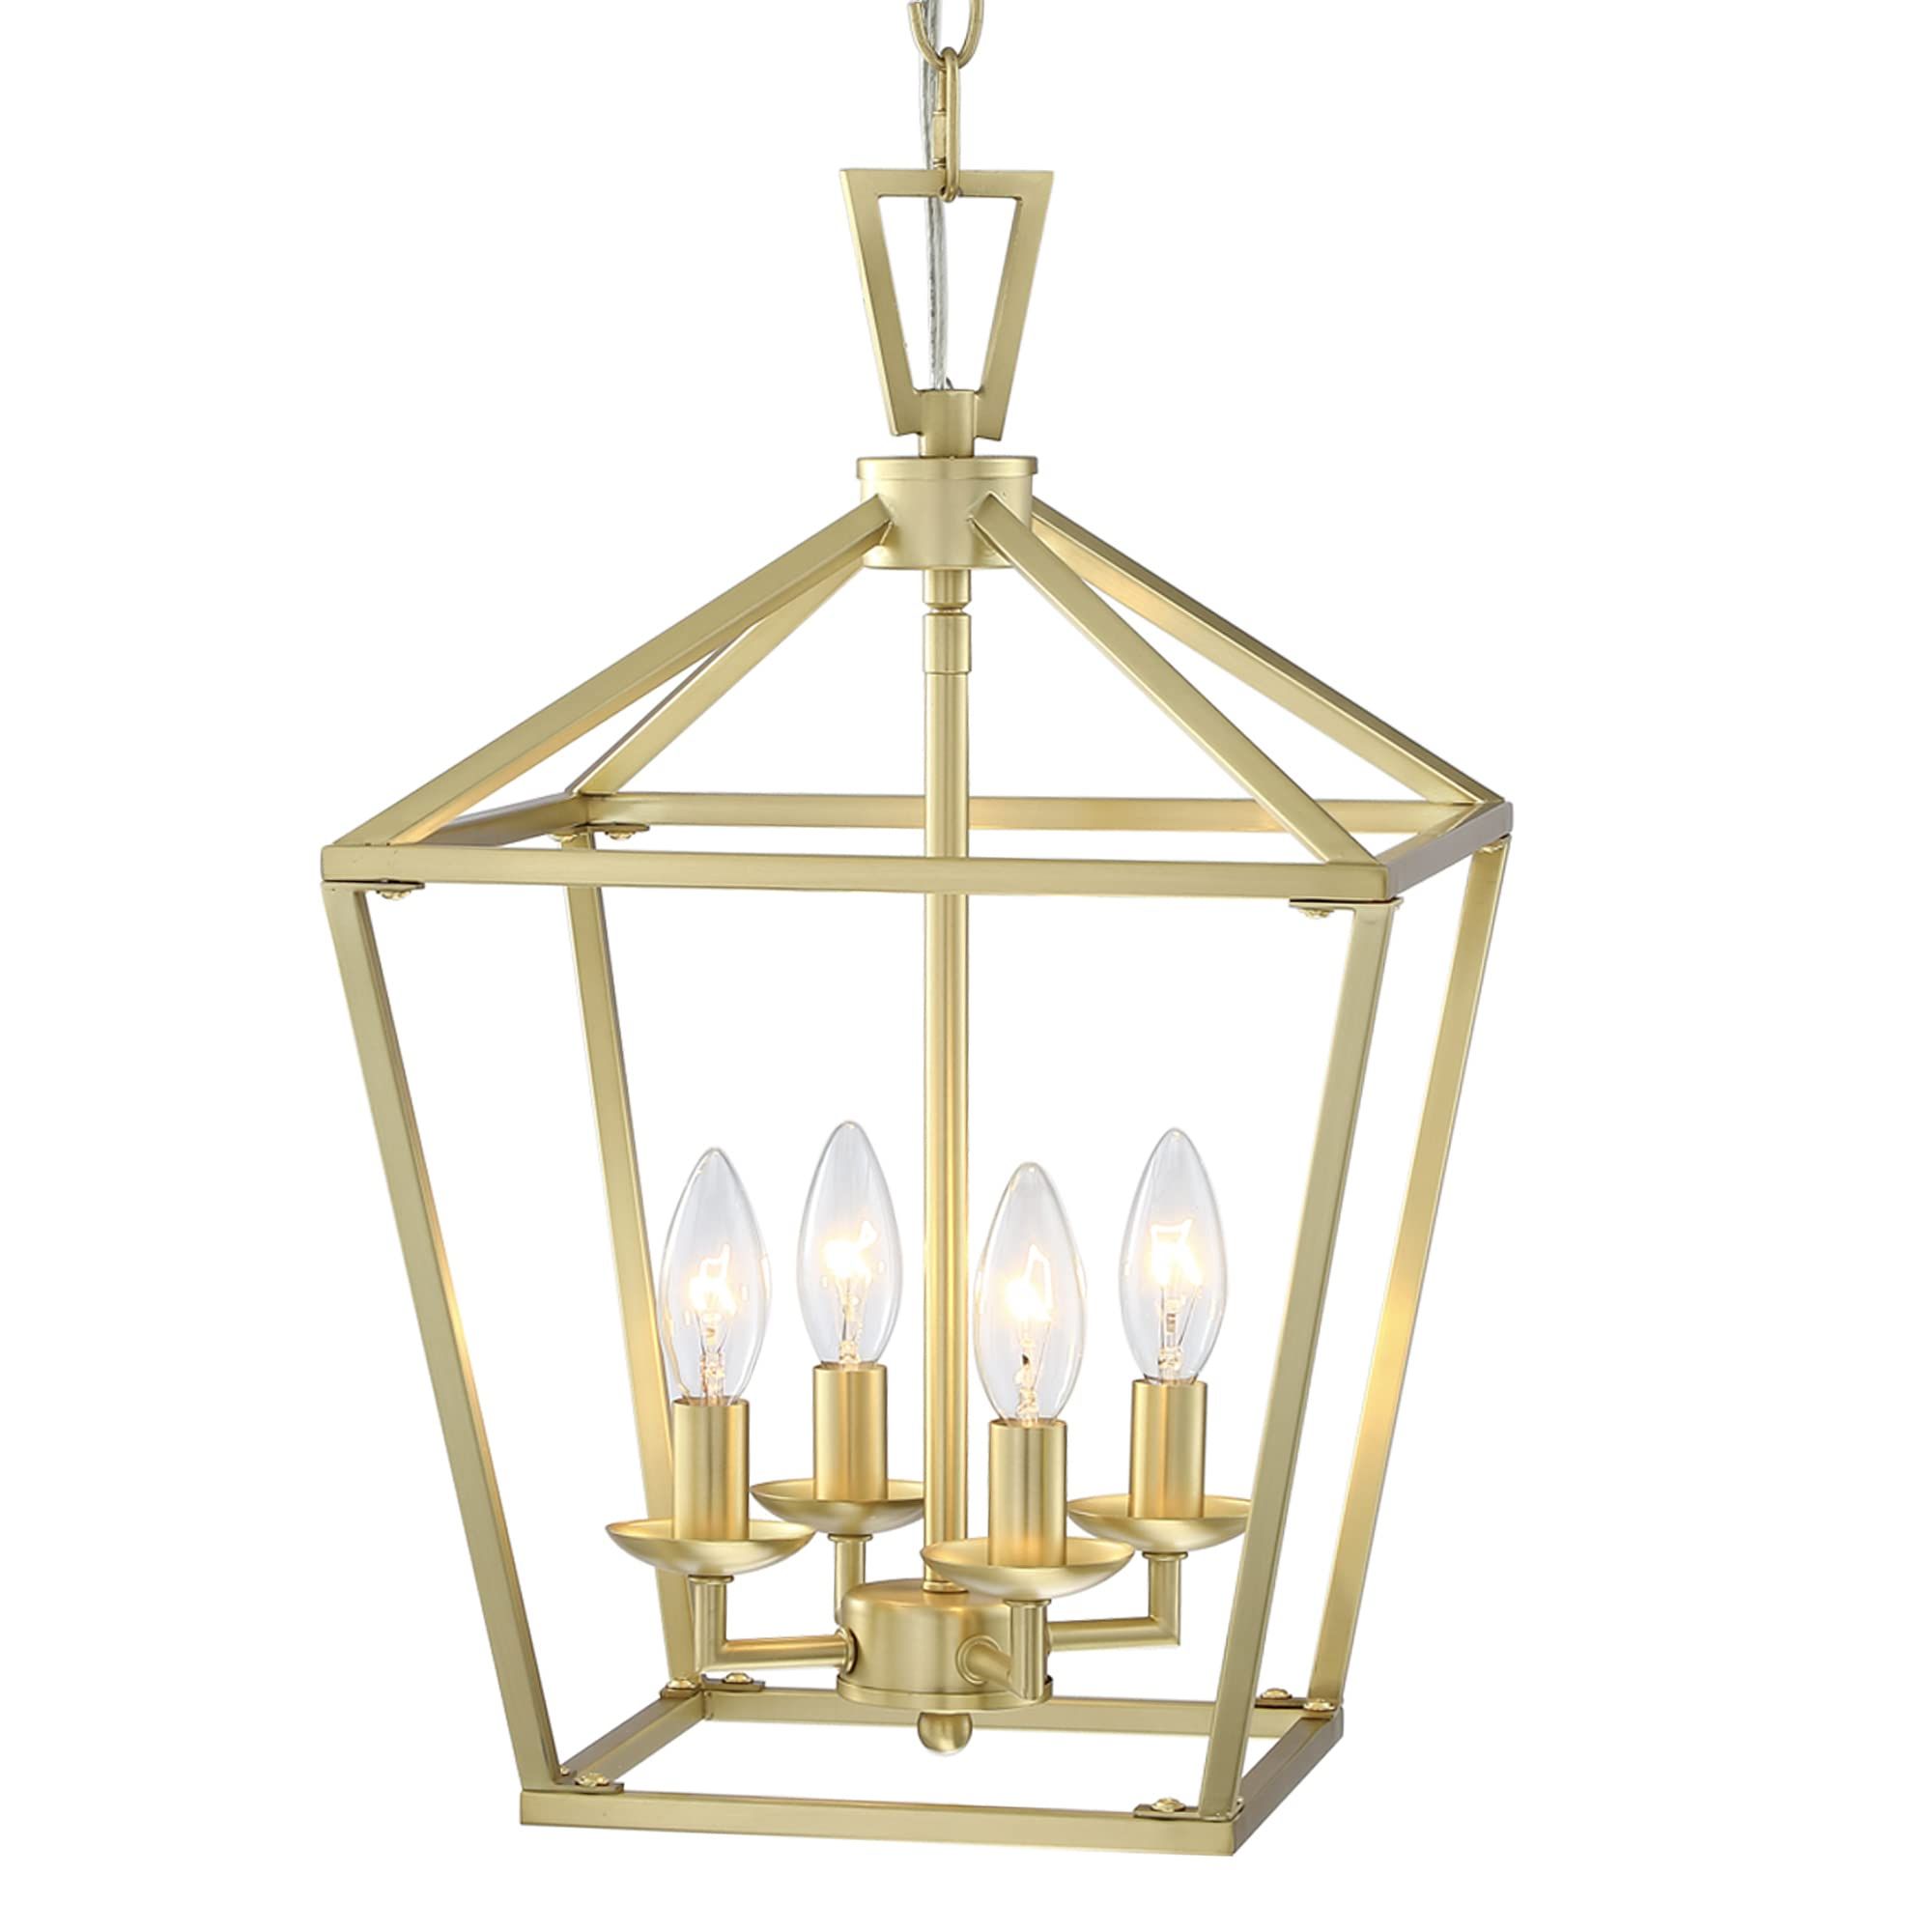 Untrammelife Gold Lantern Chandelier 4 Light Pendant Light Modern Hanging Pendant  Light Fixtures In Brushed Brass Finish, Adjustable Metal Chain Geometric  Chandelier For Kitchen Island Stair Foyer – – Amazon With Regard To Best And Newest Gilded Gold Lantern Chandeliers (View 6 of 10)